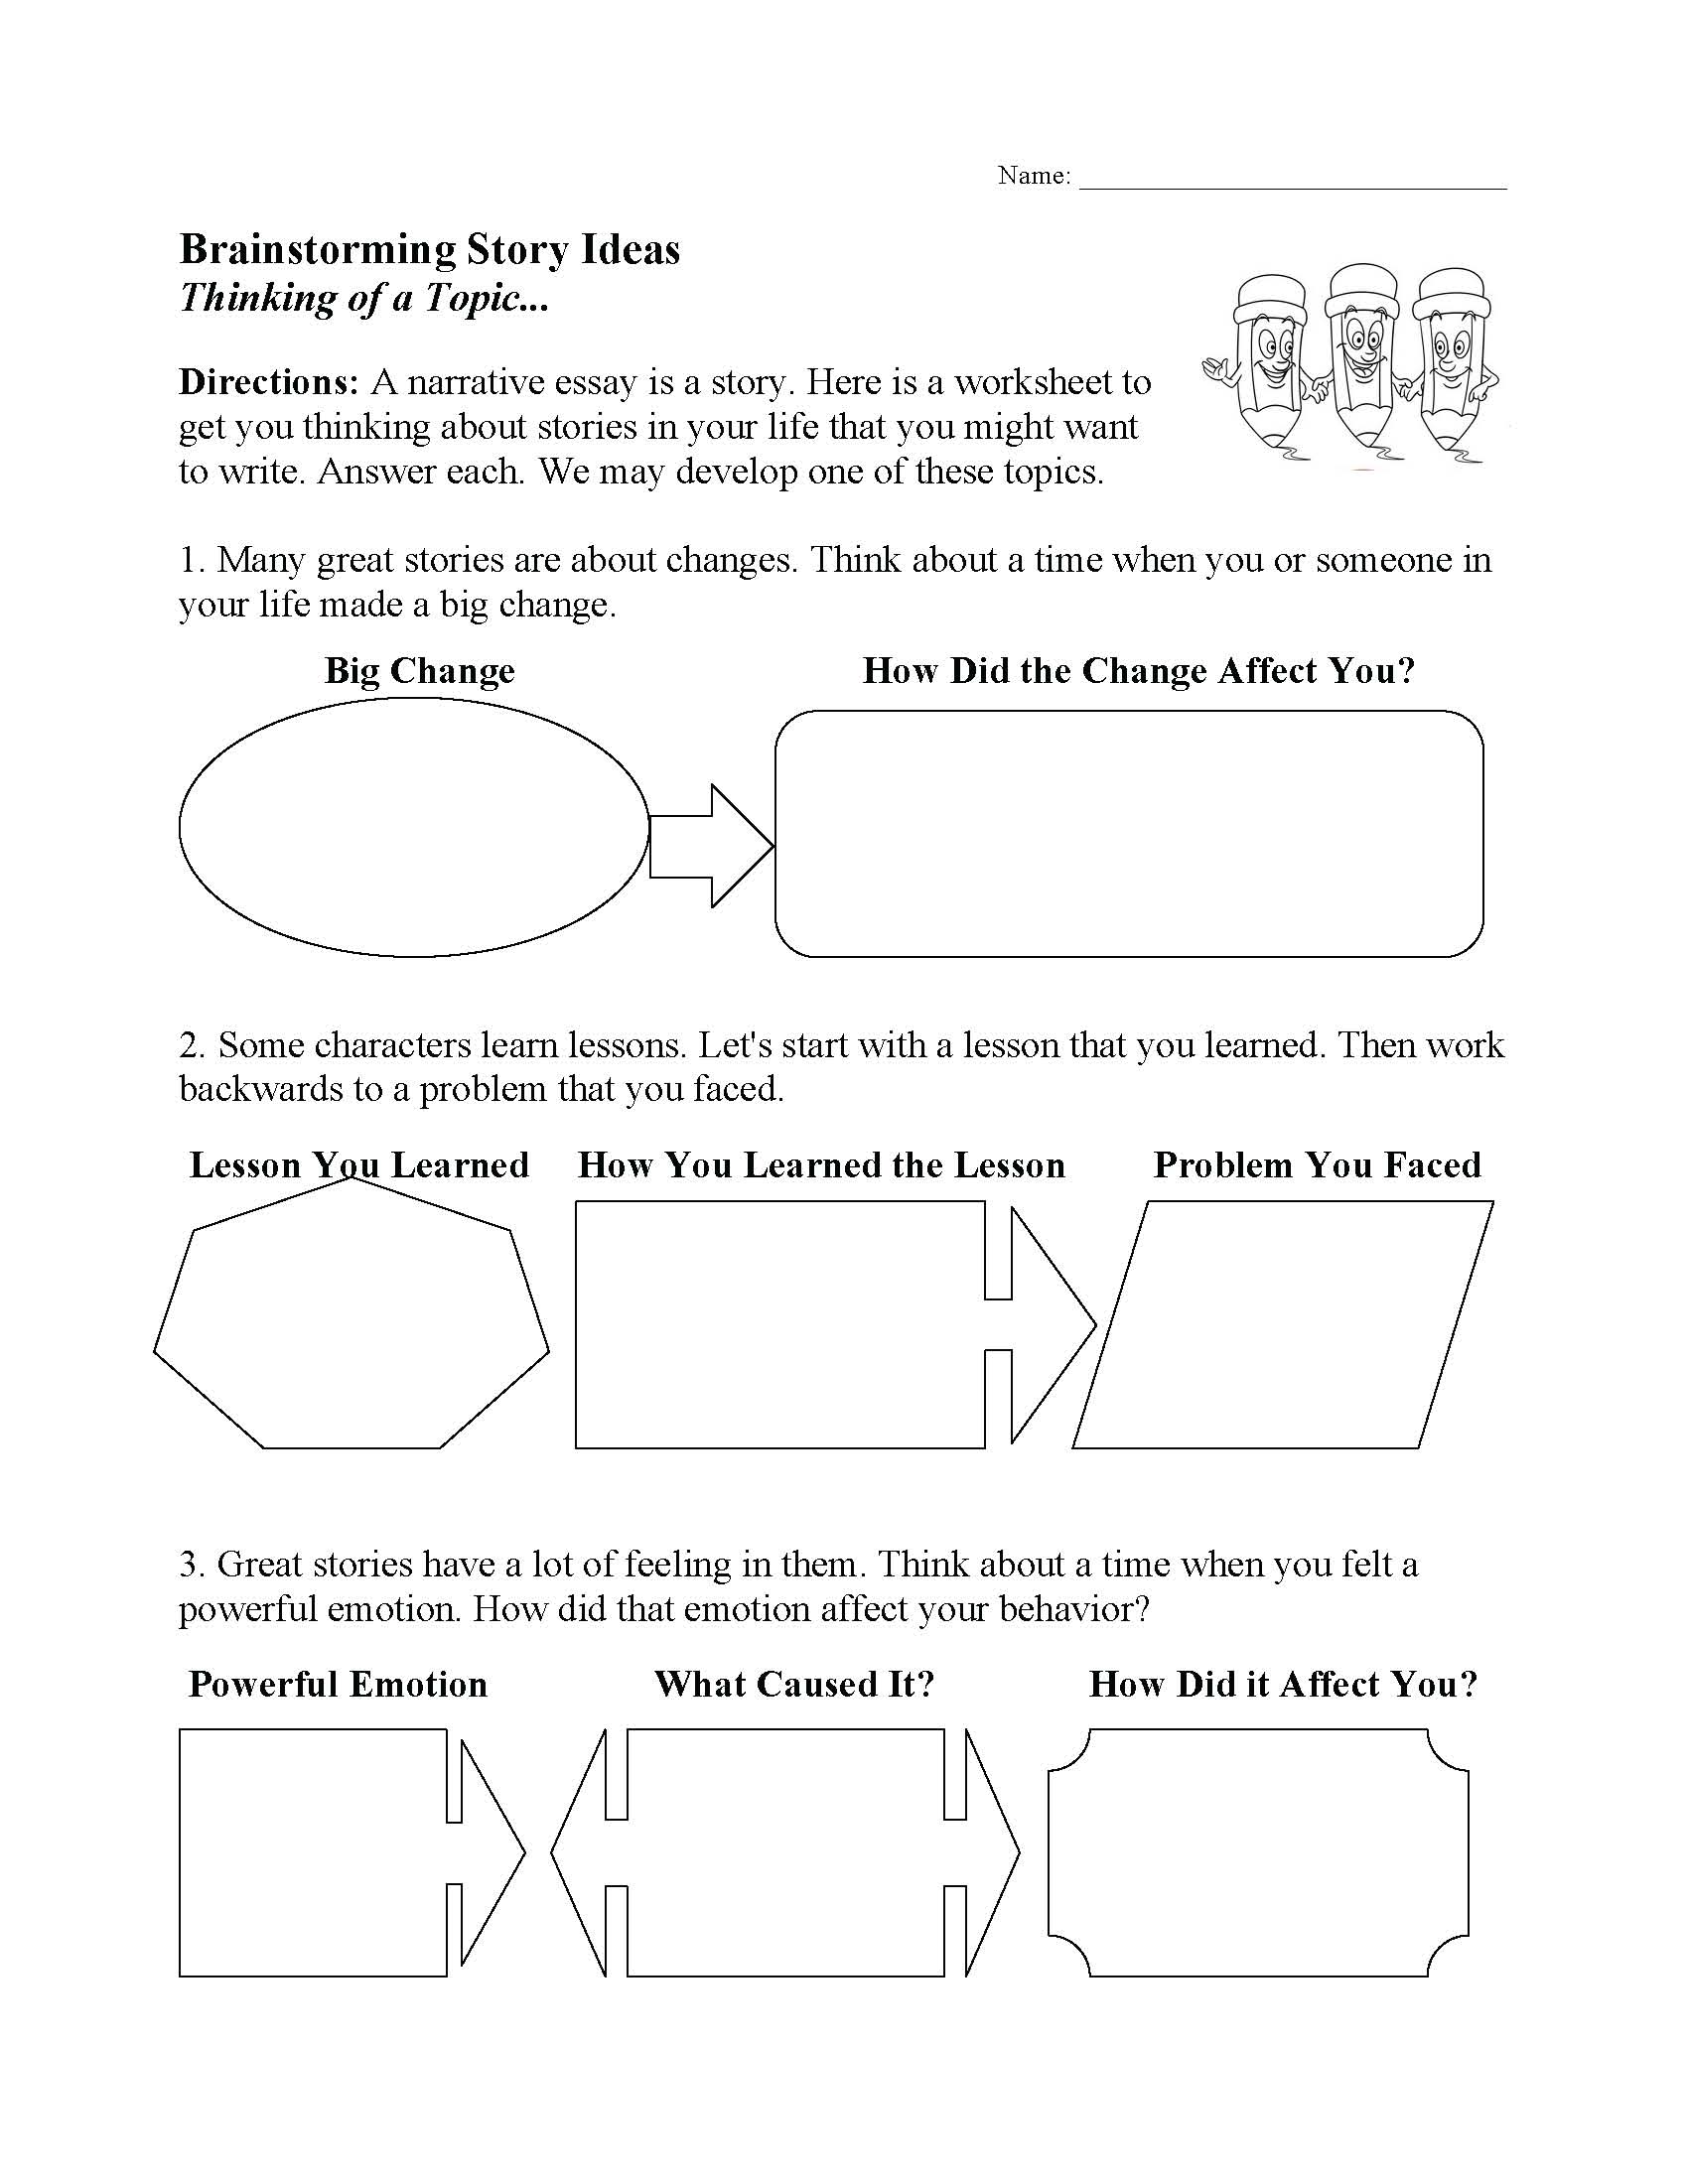 This is a preview image of our Brainstorming Story Ideas Worksheet. Click on it to enlarge this image and view the source file.